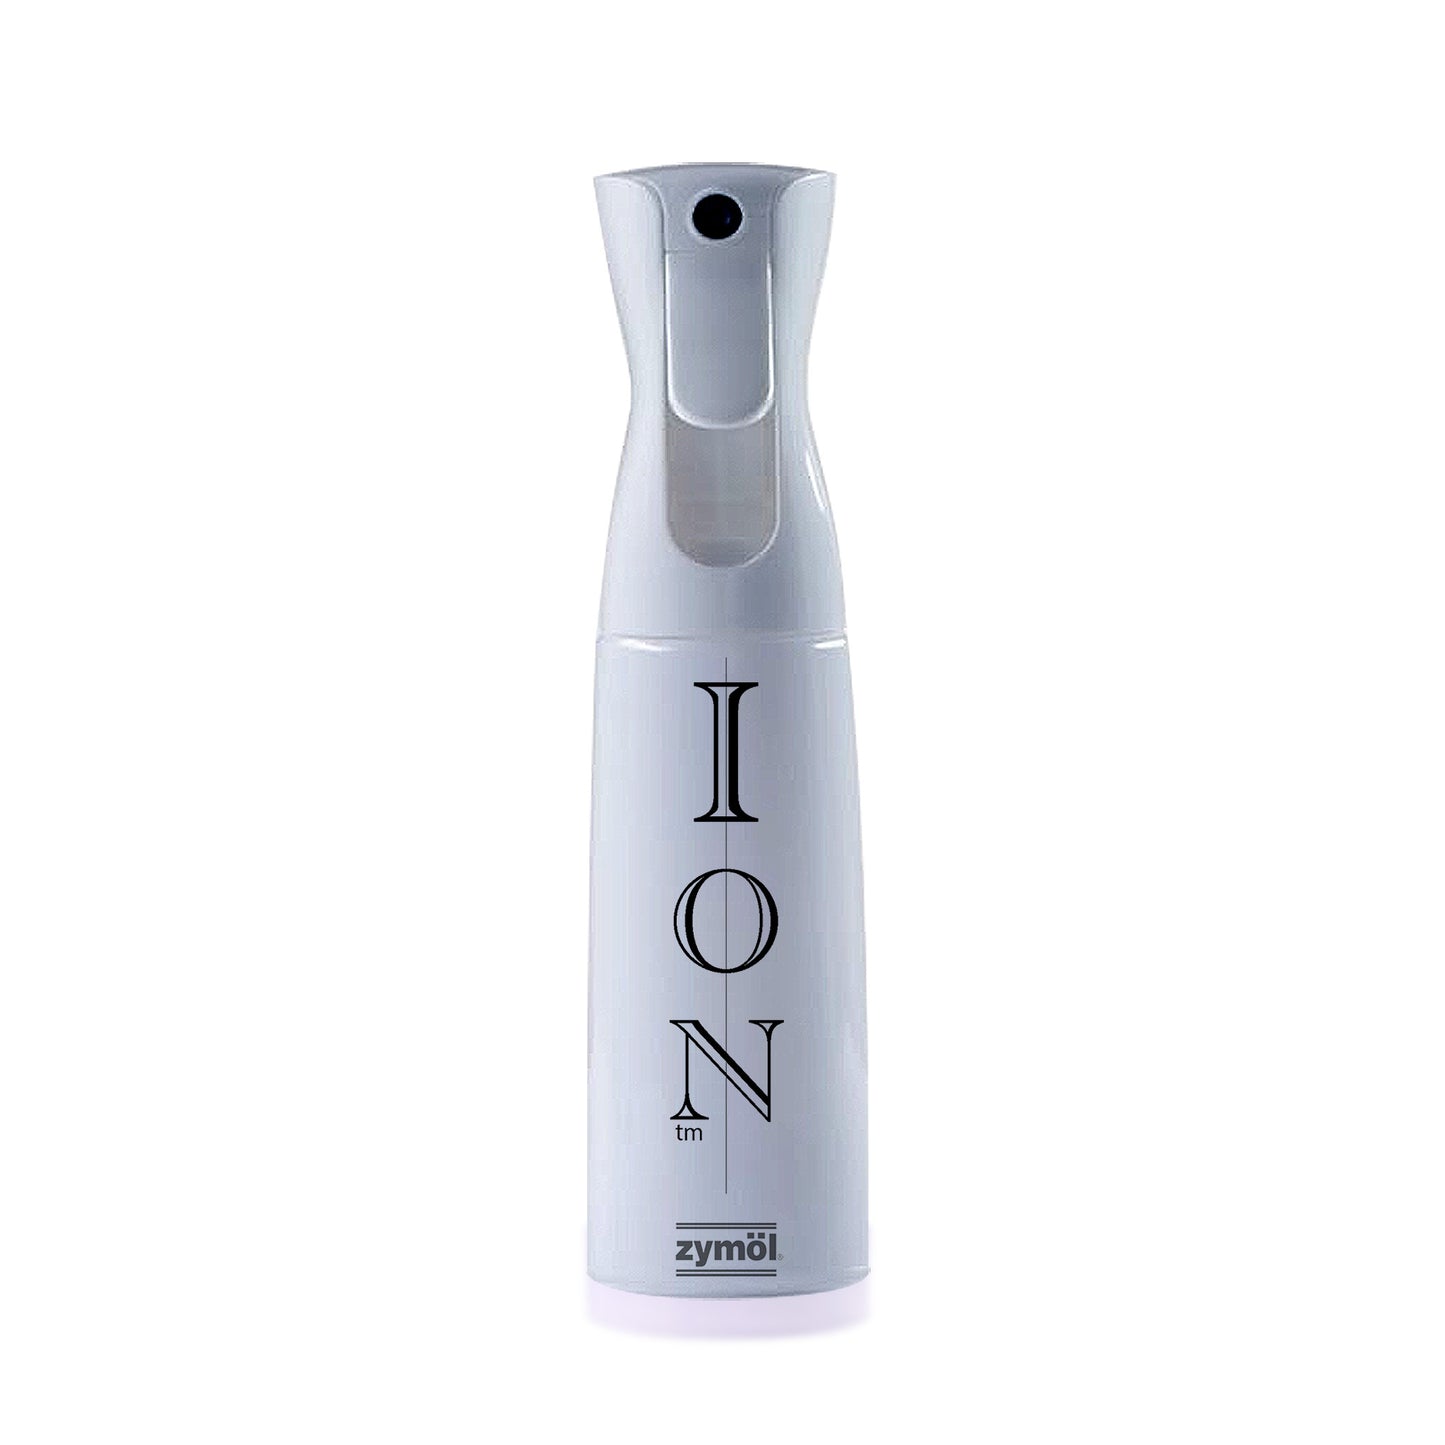 ION™ - the EV Sealant Developed with Tesla to protect All EVs